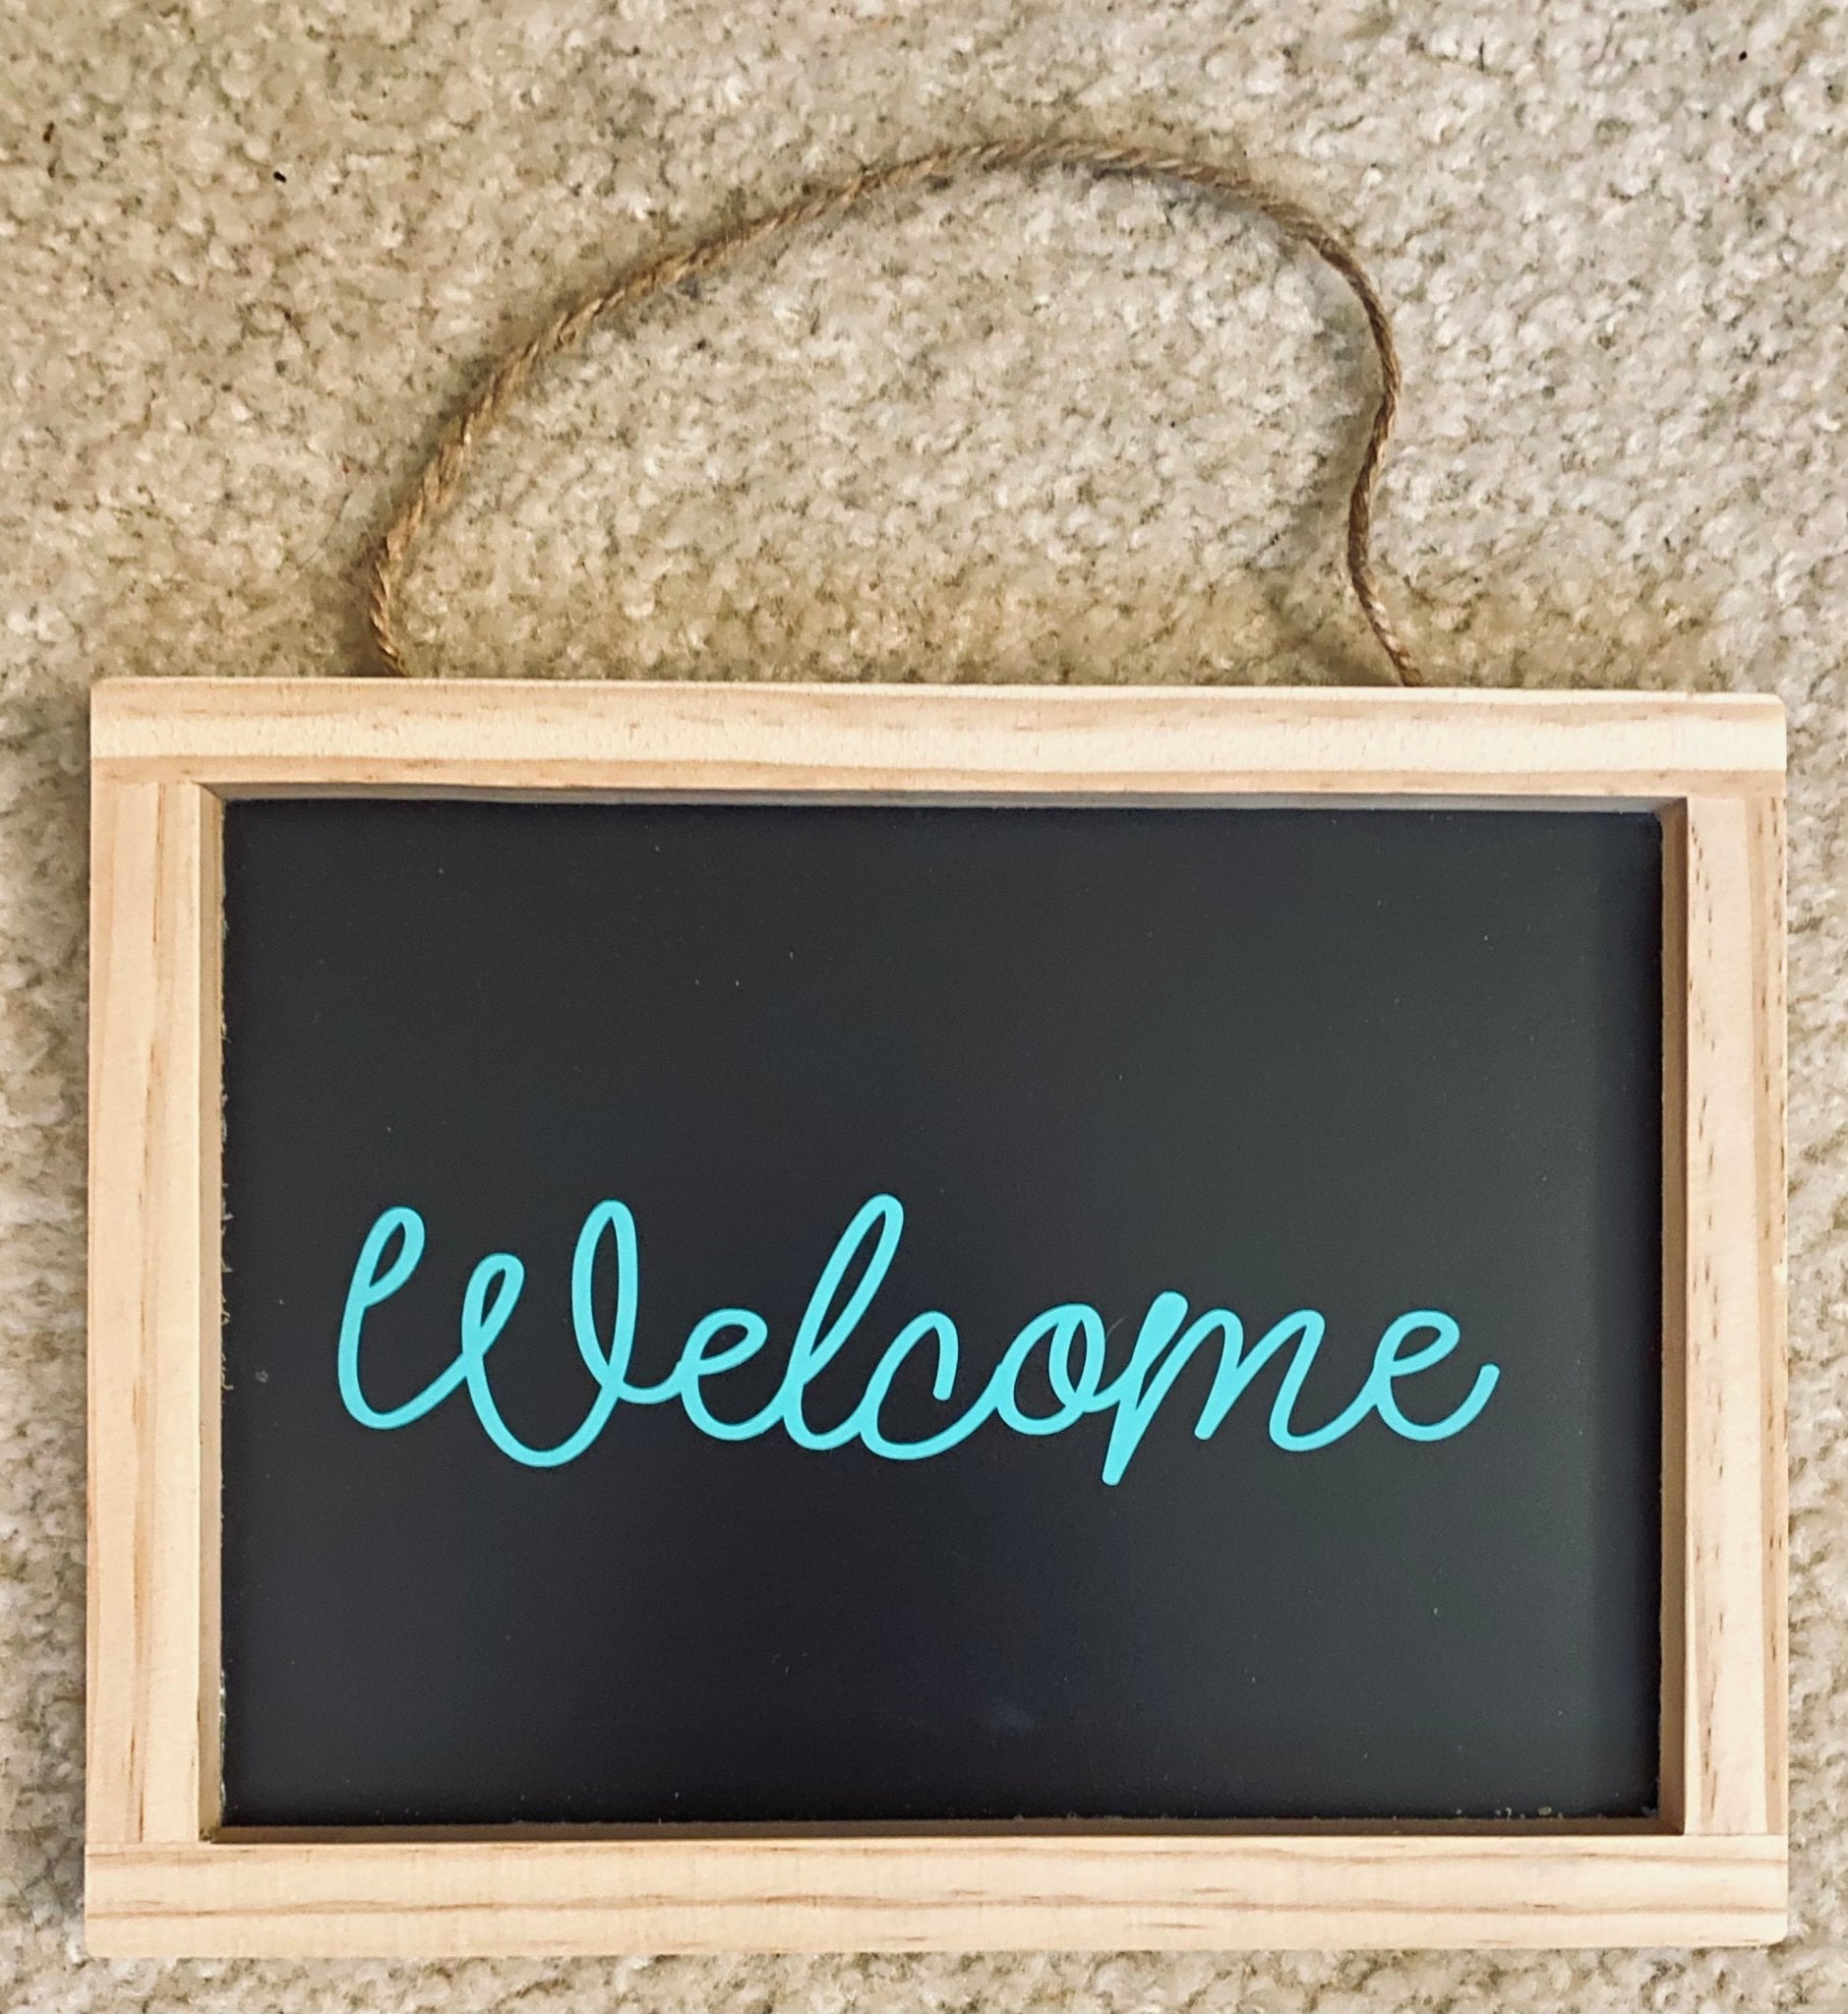 Welcome sign - Blue Cava